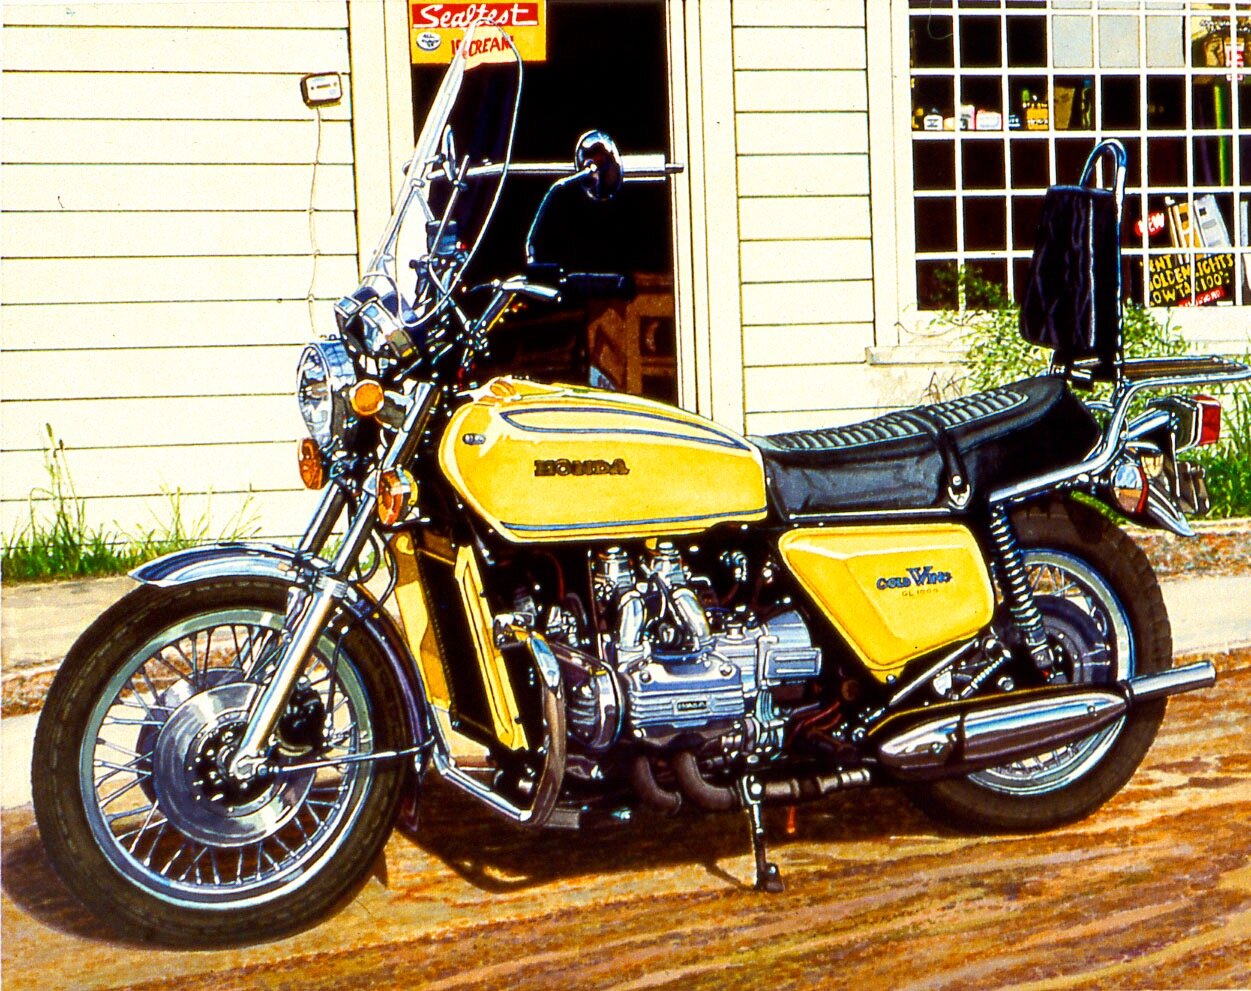 Little Roy's Gold Wing